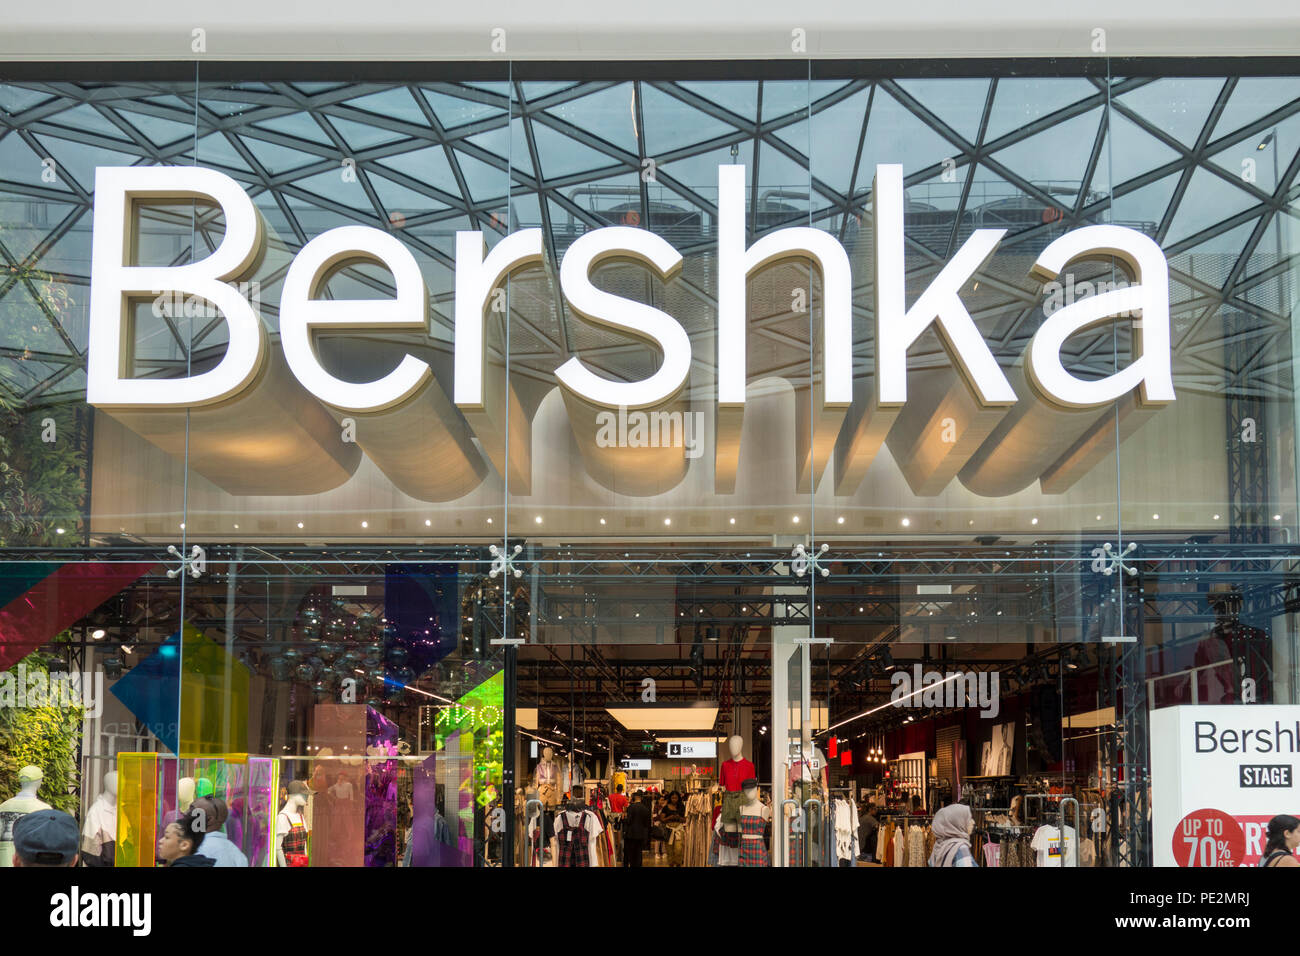 Bershka Store High Resolution Stock Photography and Images - Alamy